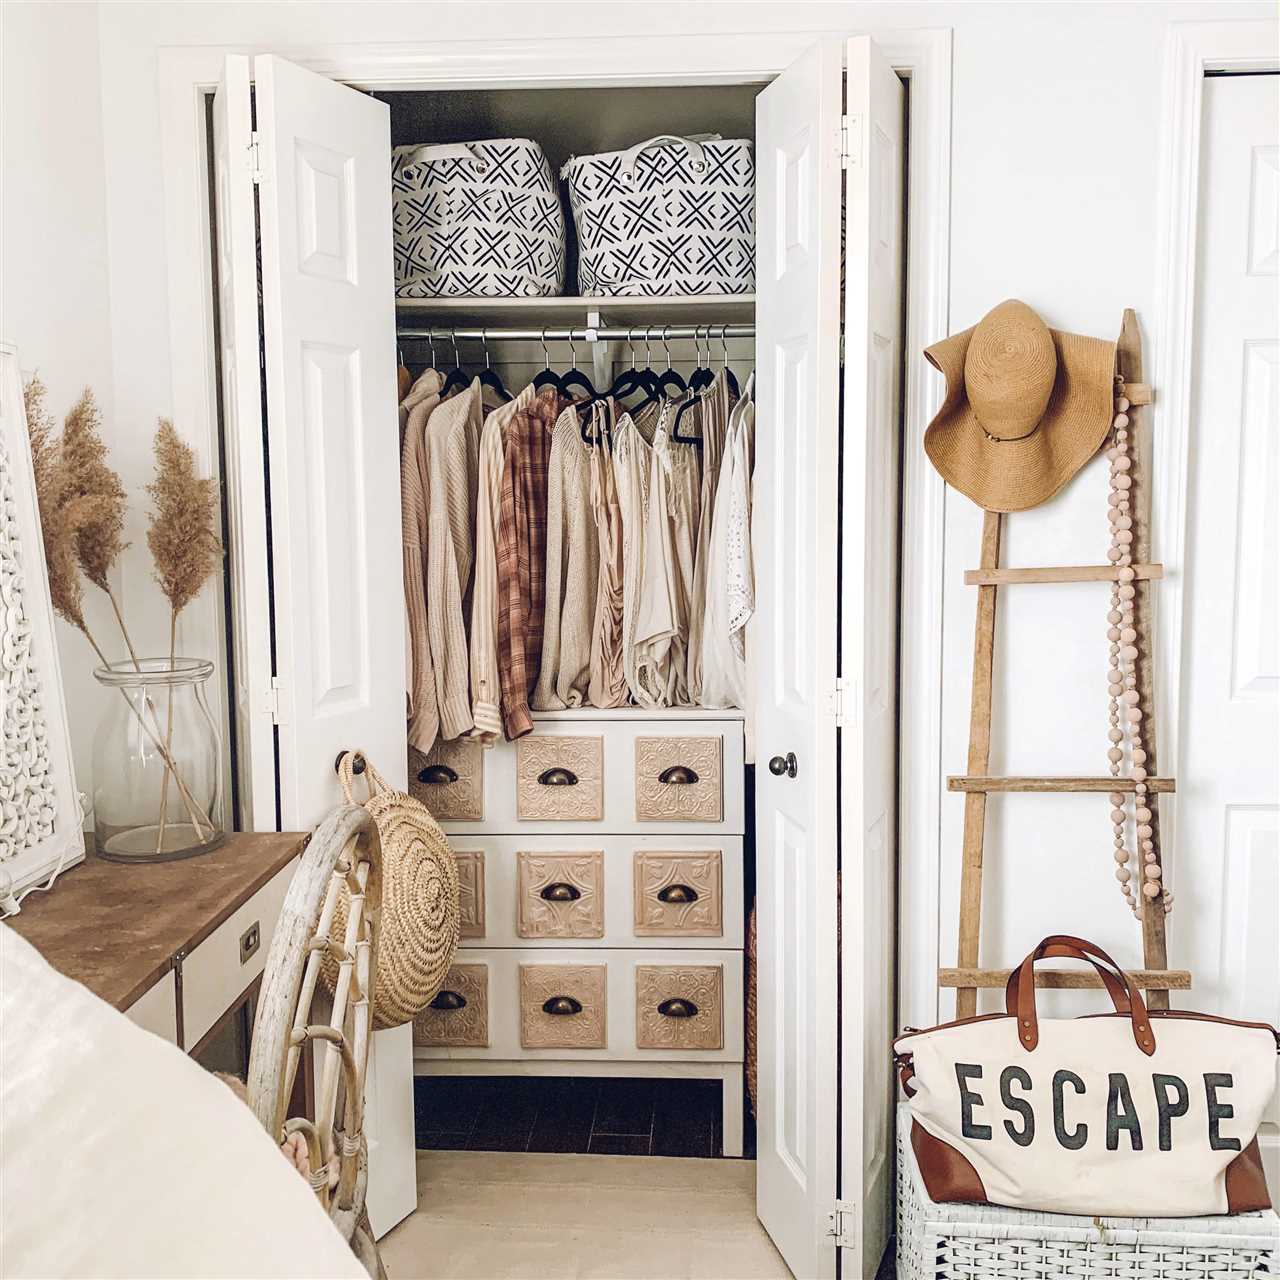 Maximize Your Closet Space with Stylish and Functional Storage Bins